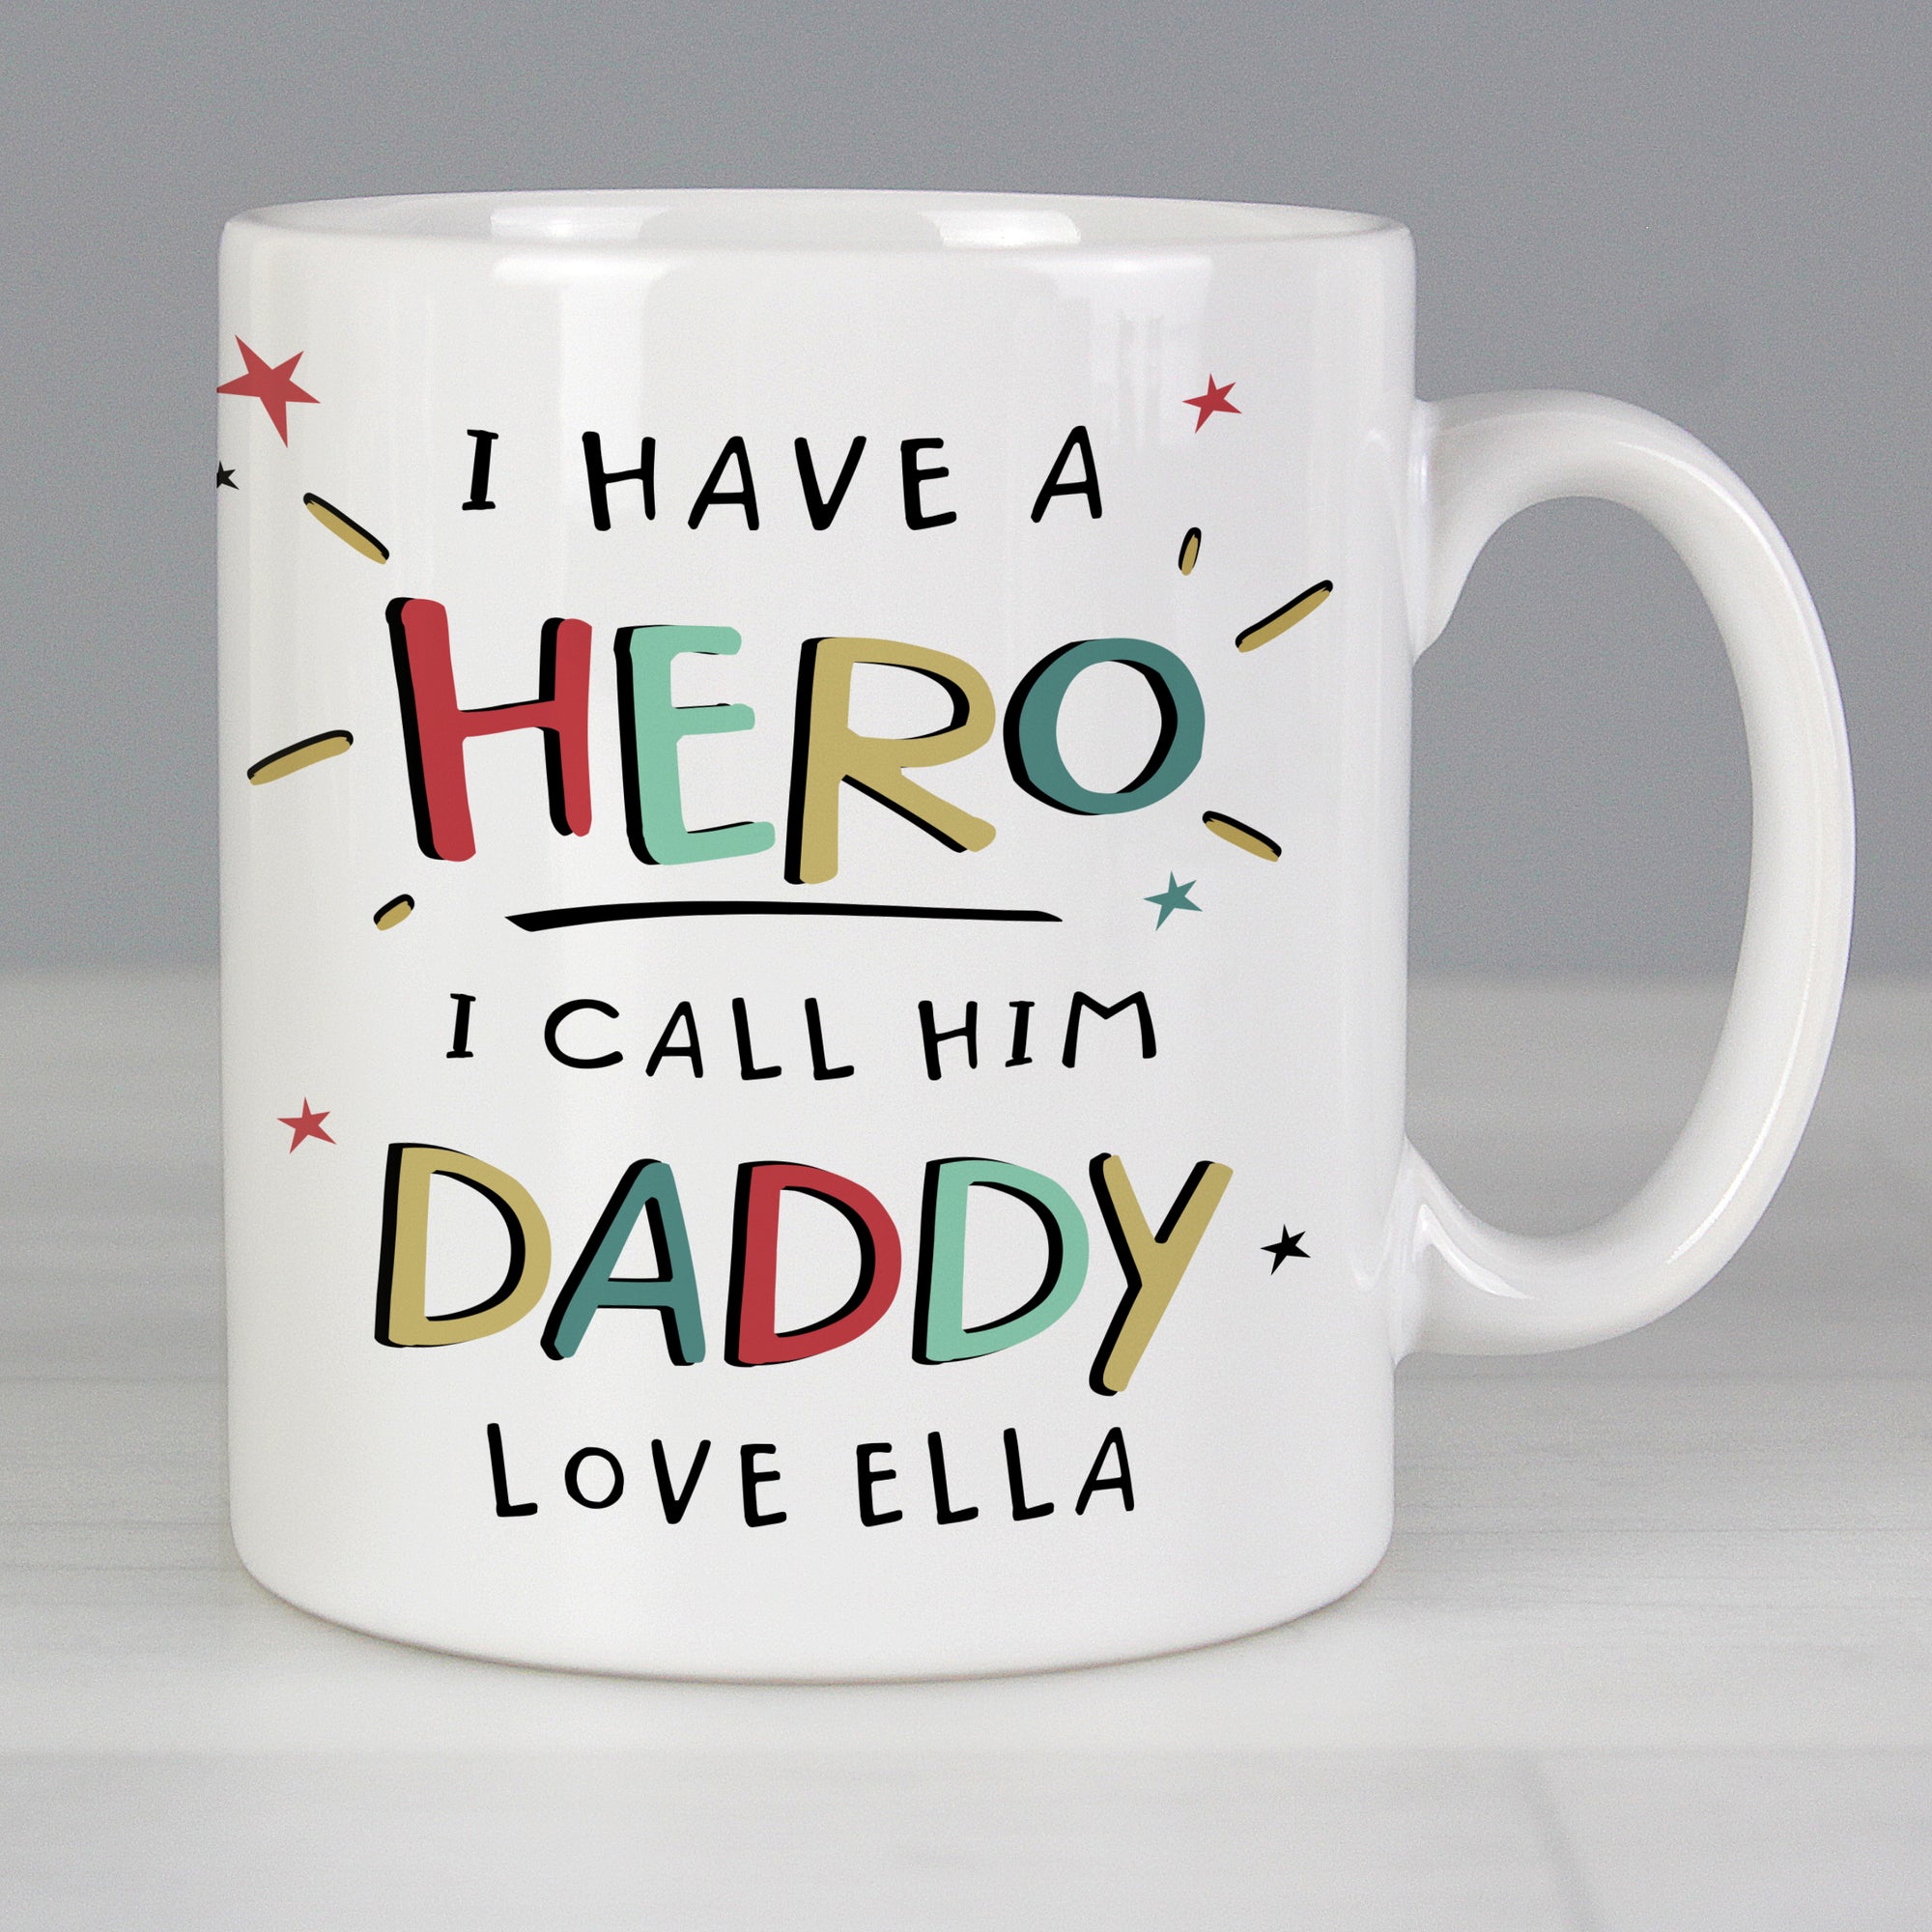 Image of a personalised white ceramic mug for a dad. The front of the mug has 'I have a hero, I call him daddy' on the front that is printed in a large bright uppercase font. Below this there is space to add one line of your own text and the back of the mug can be personalised with your own special message over up to 4 lines which will be printed in a black font.